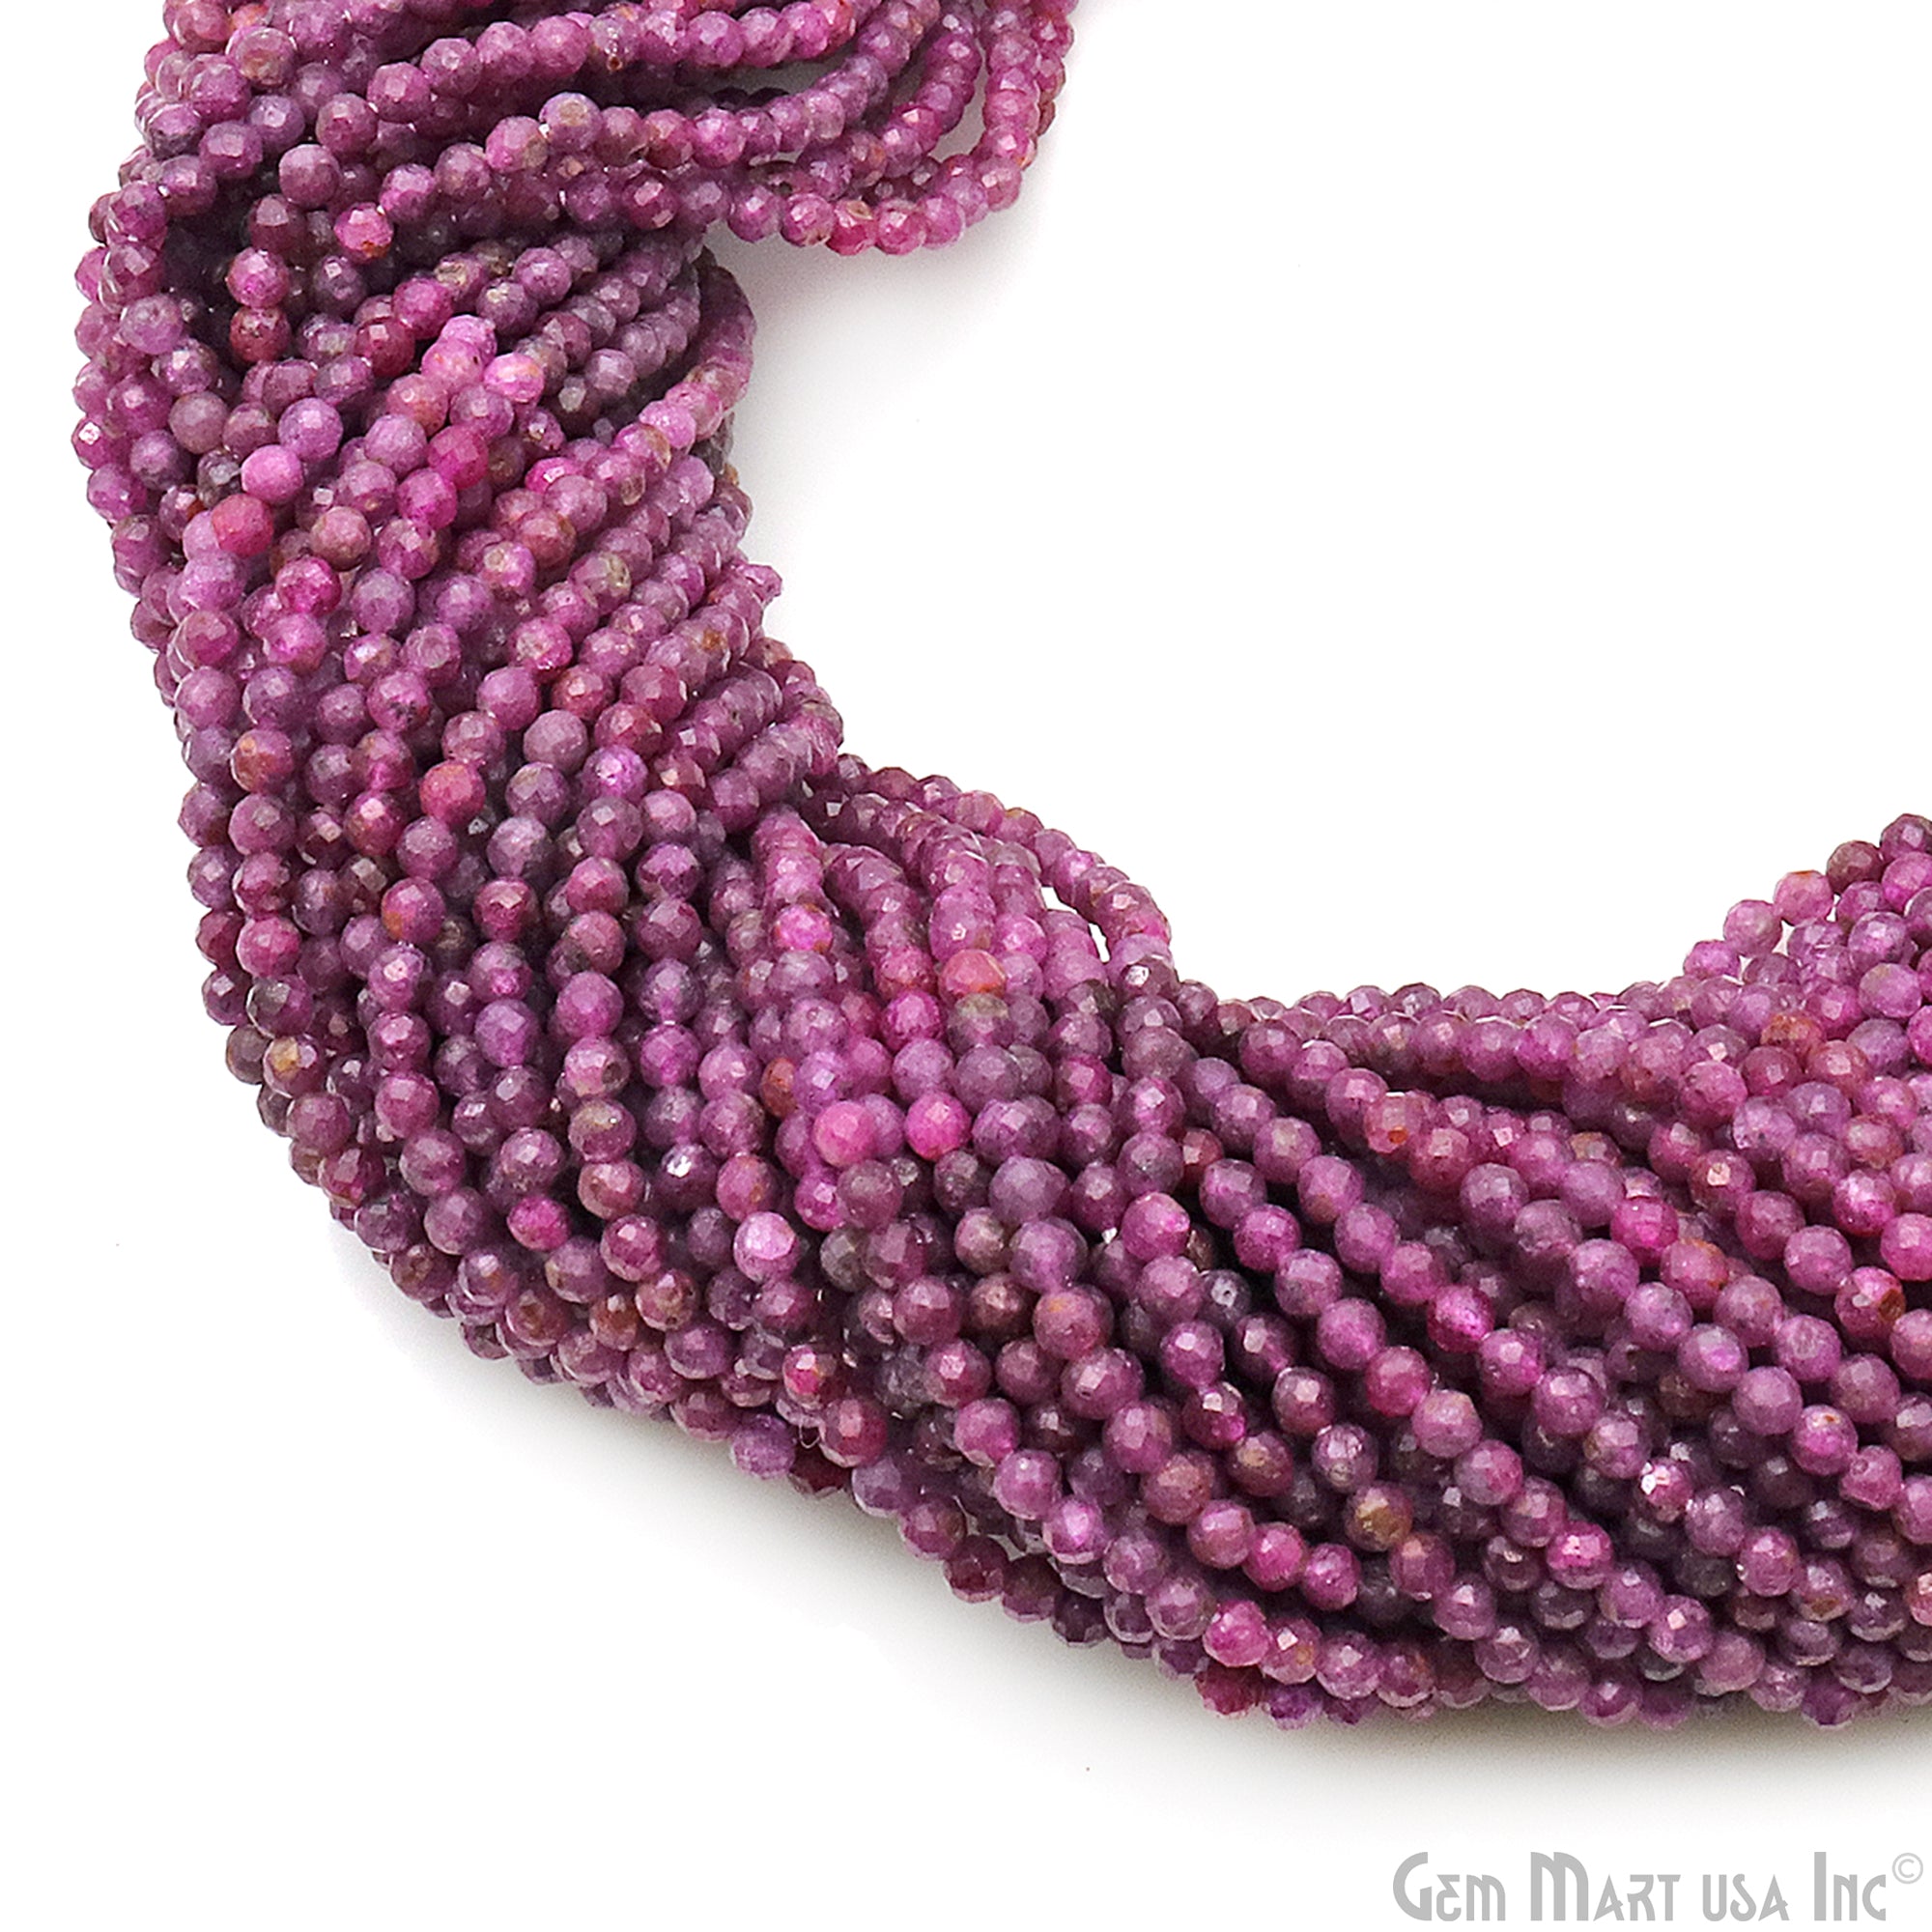 Ruby Faceted 3mm Gemstone Rondelle Beads 1 Strand